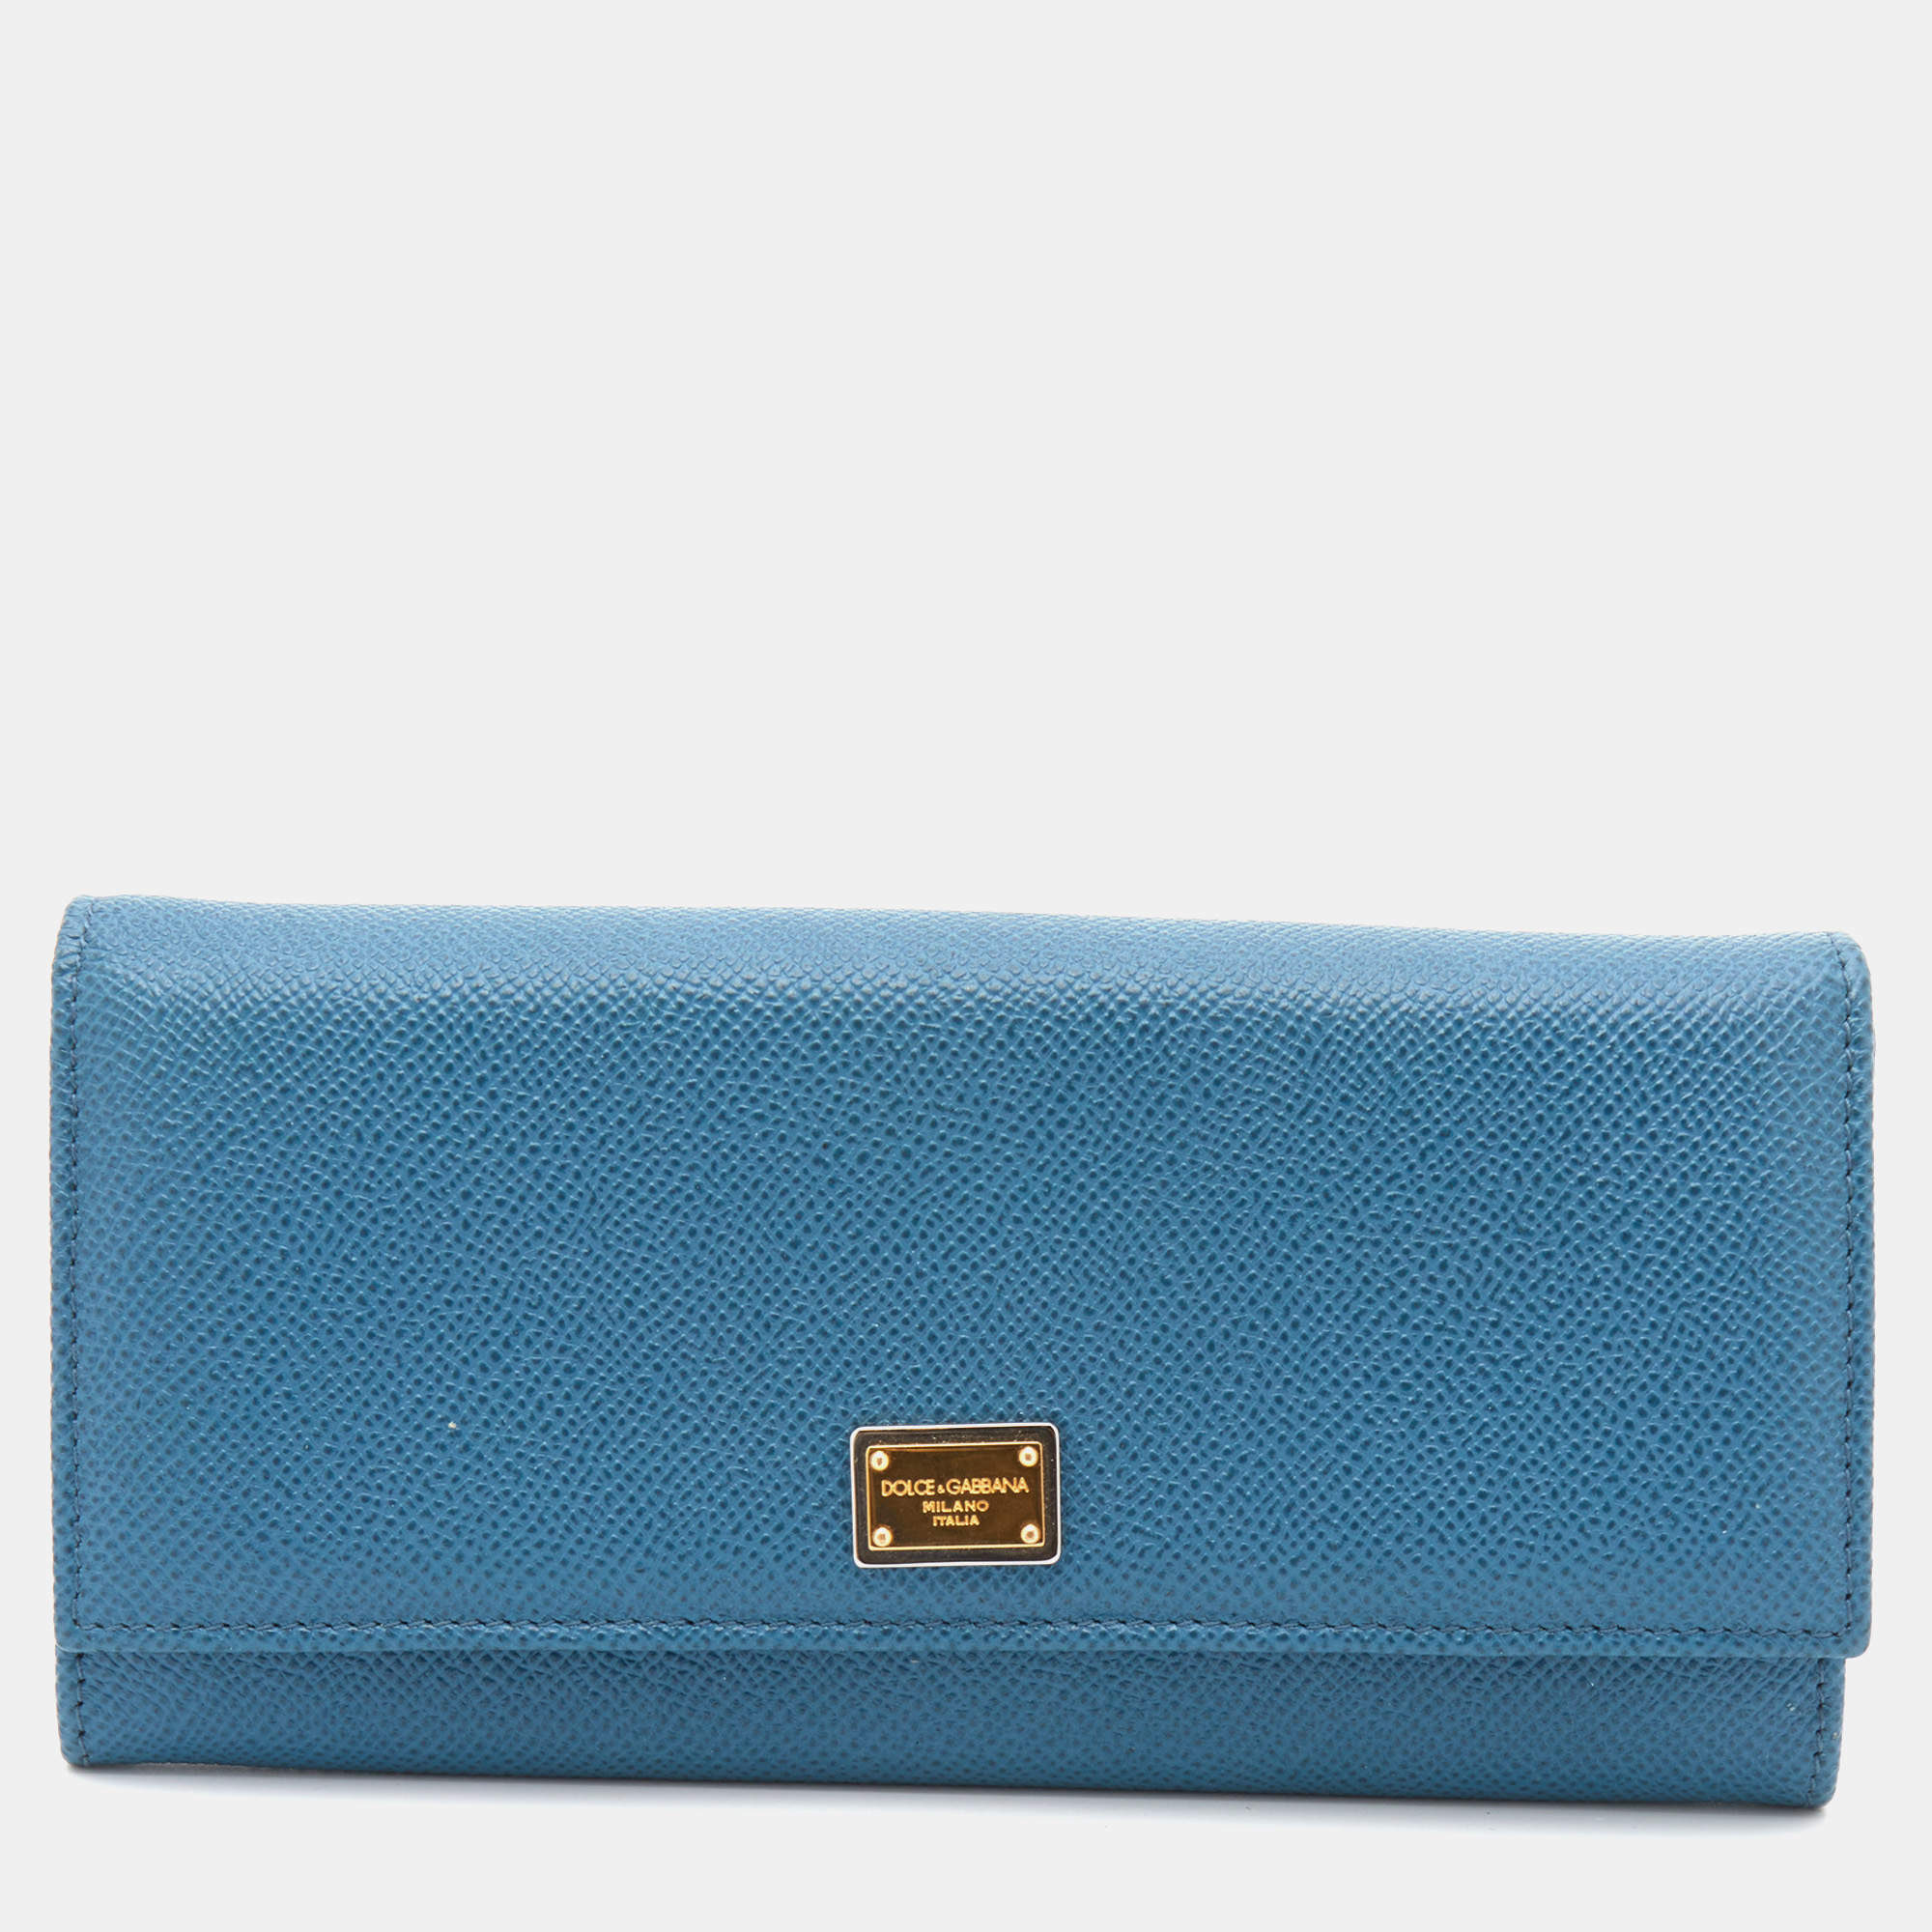 Dolce & Gabbana Blue Leather Dauphine Flap Continental Wallet